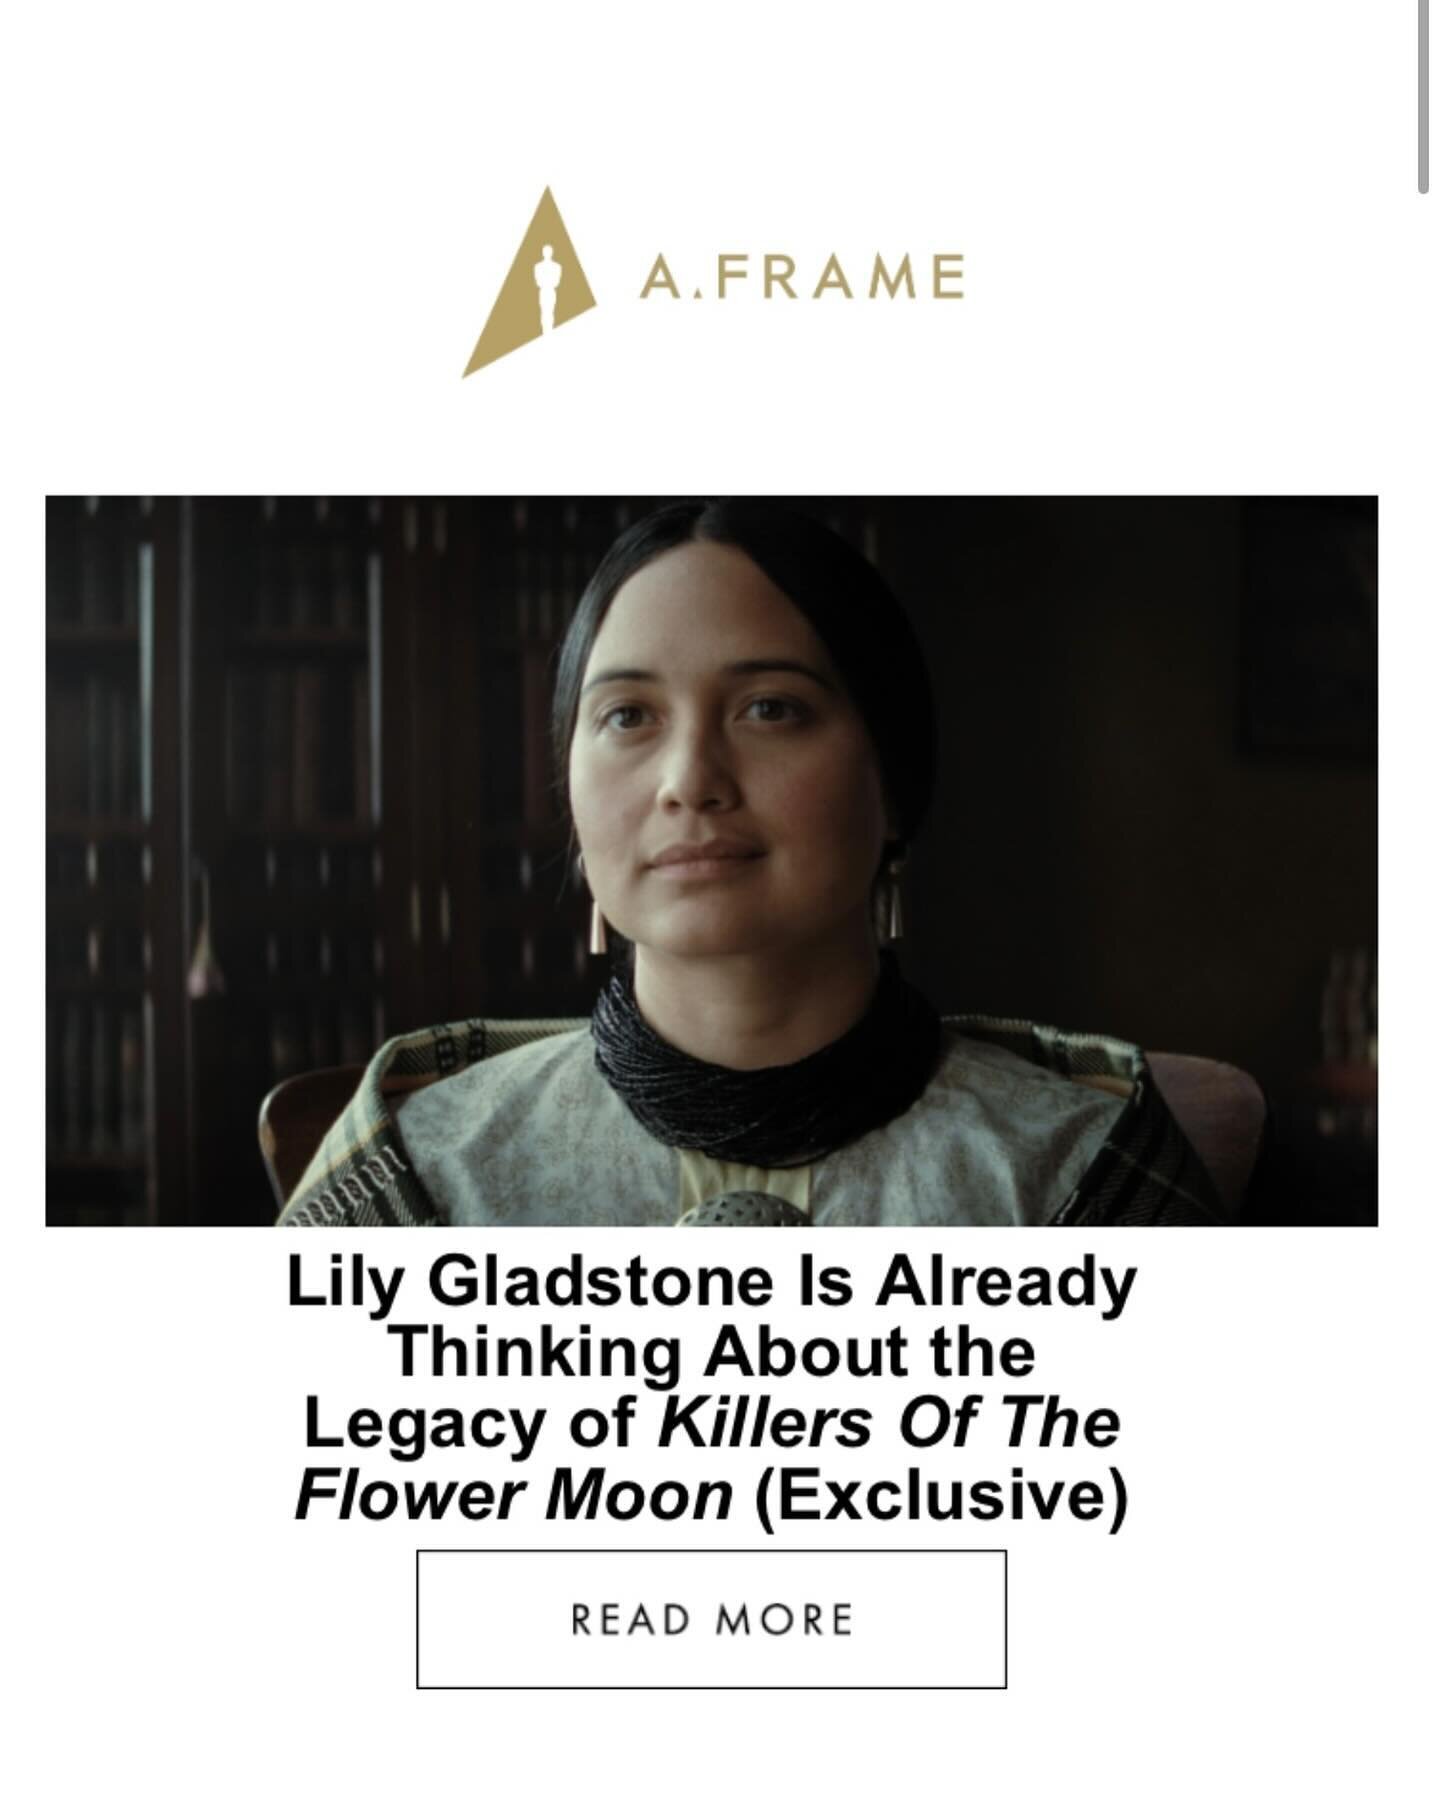 working with @theacademy&rsquo;s editorial news magazine #aframe has been a dream. they are churning out quality article after quality article celebrating the world of film - and year round! it has been an honor helping book interviews. and more to c